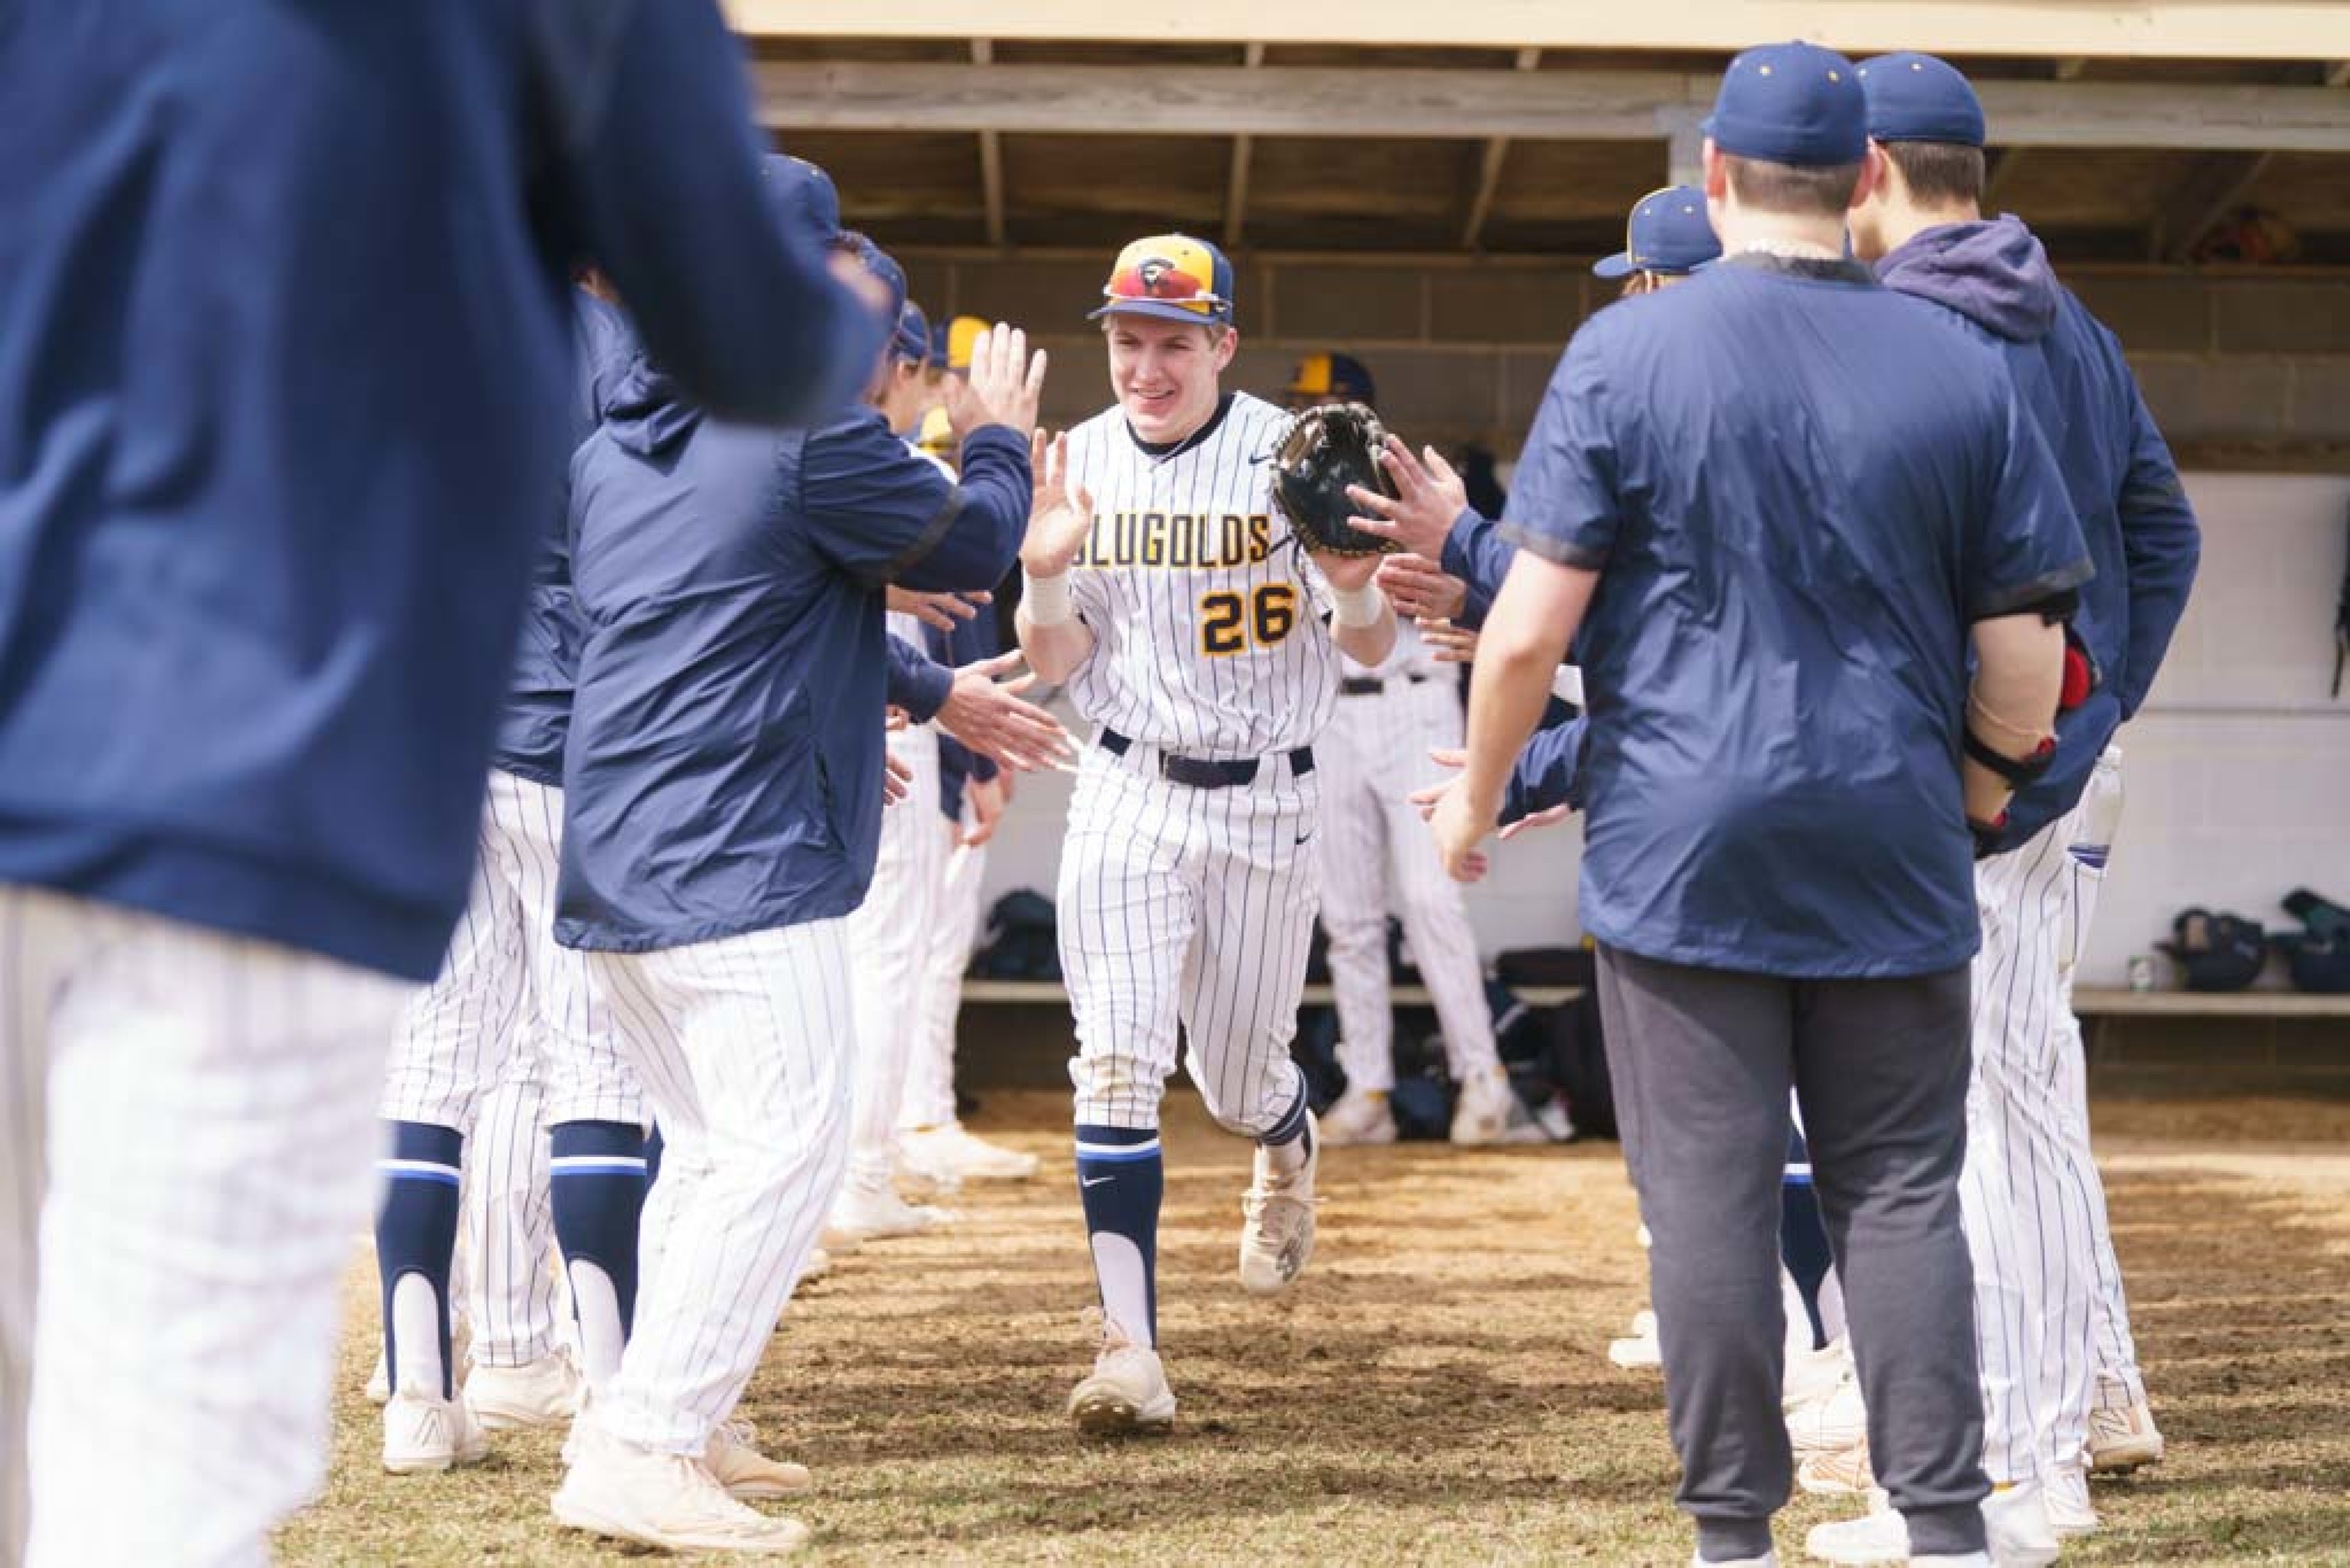 Blugolds hold off Augustana for 1st win